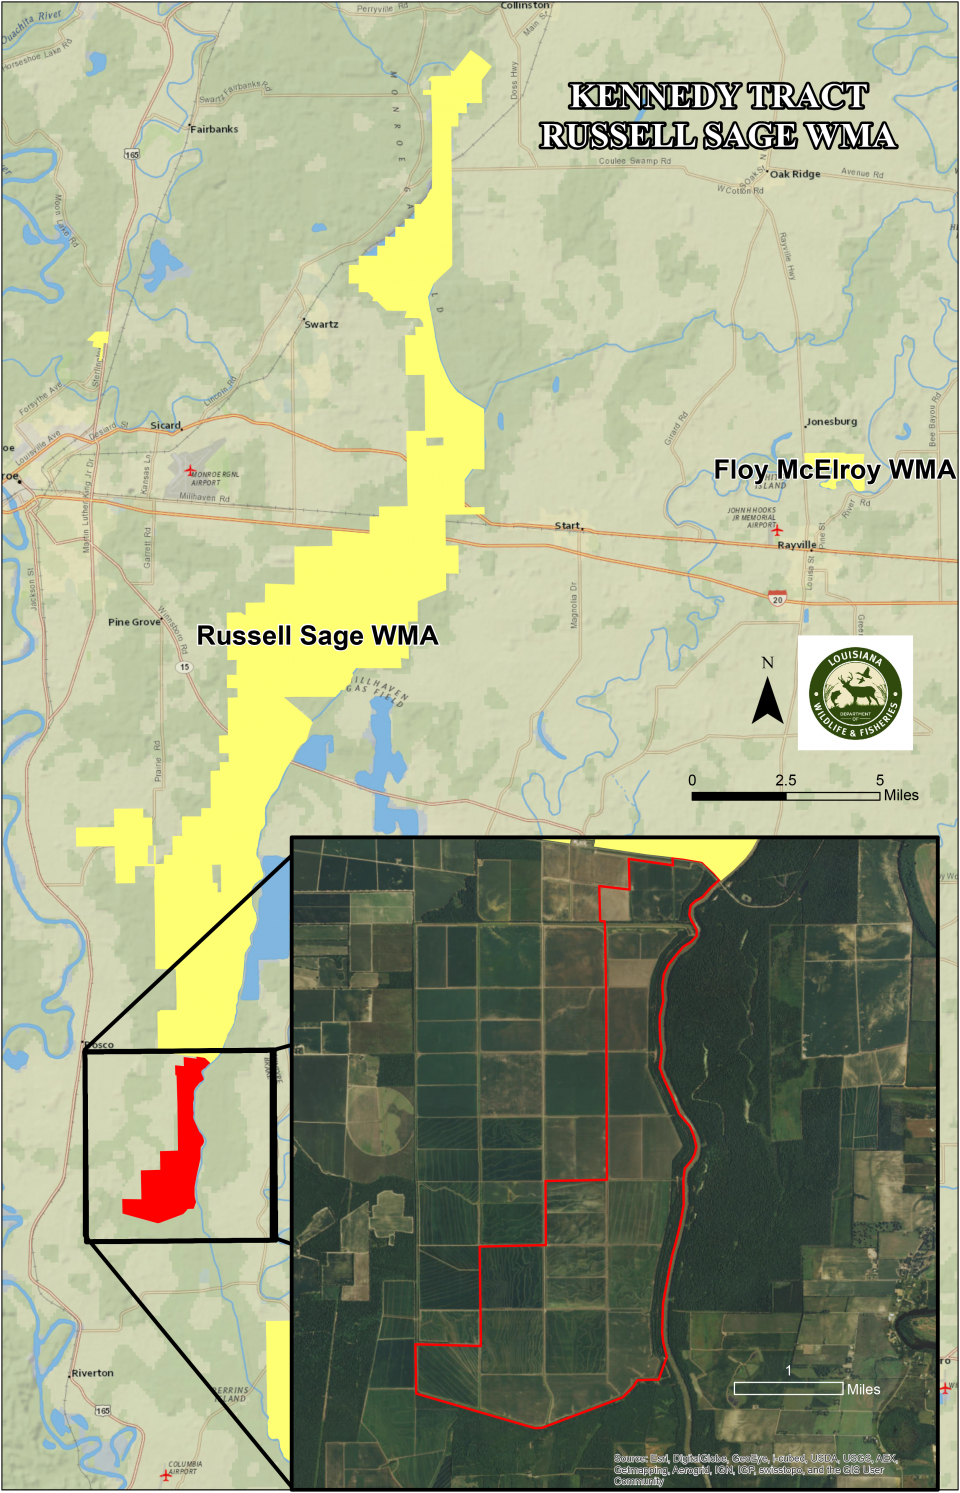 Russell Sage Wma With Kennedy Tract Aug 2015 